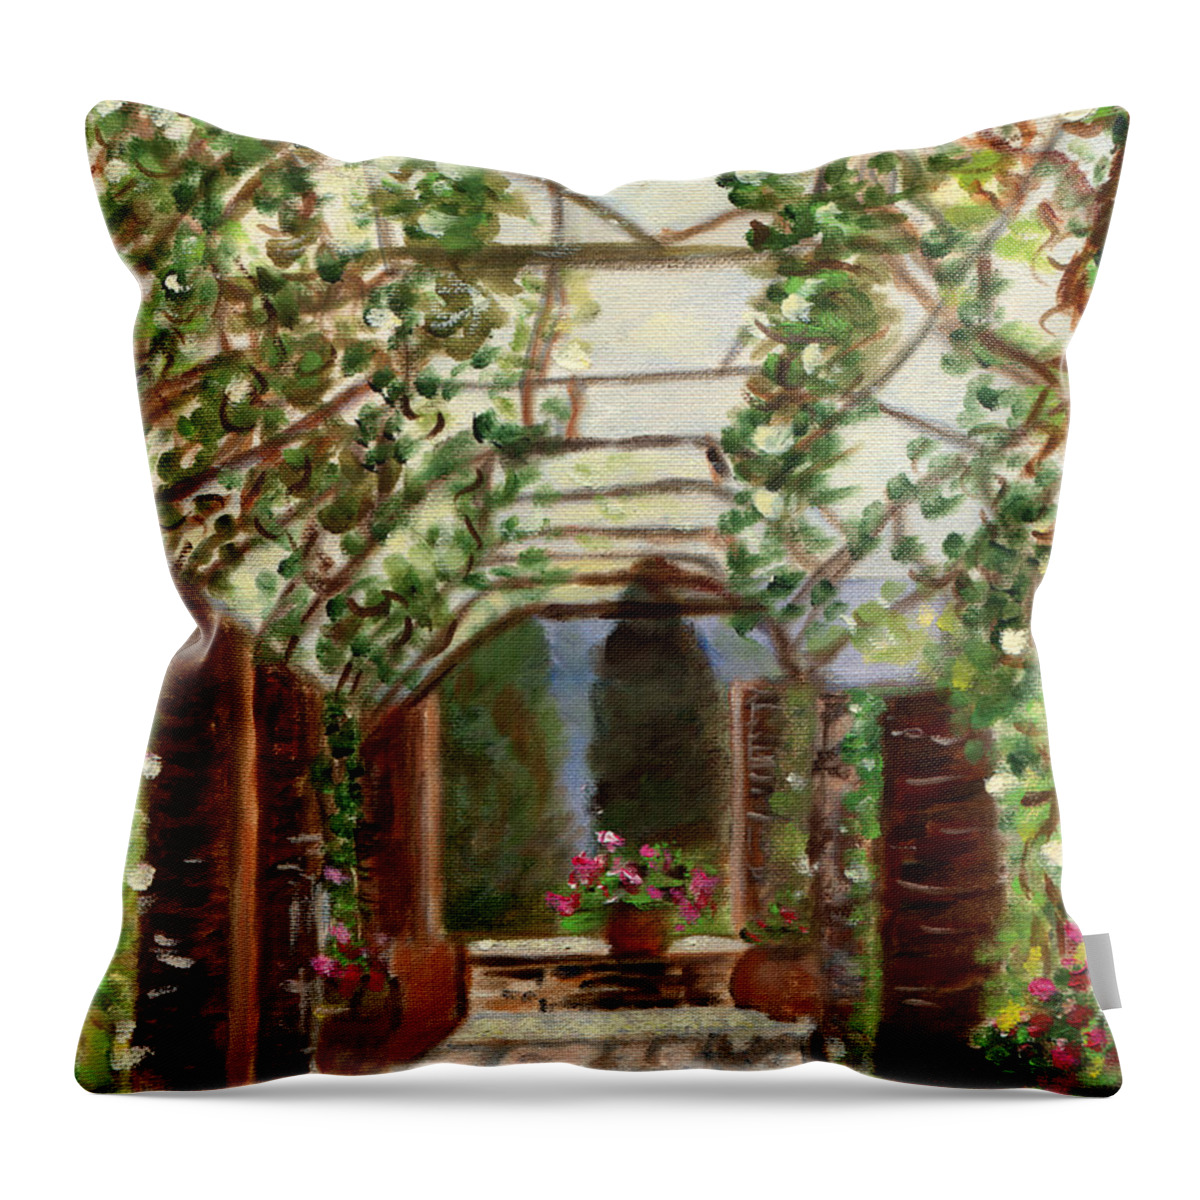 Italy Throw Pillow featuring the painting The Count's Courtyard by Juliette Becker